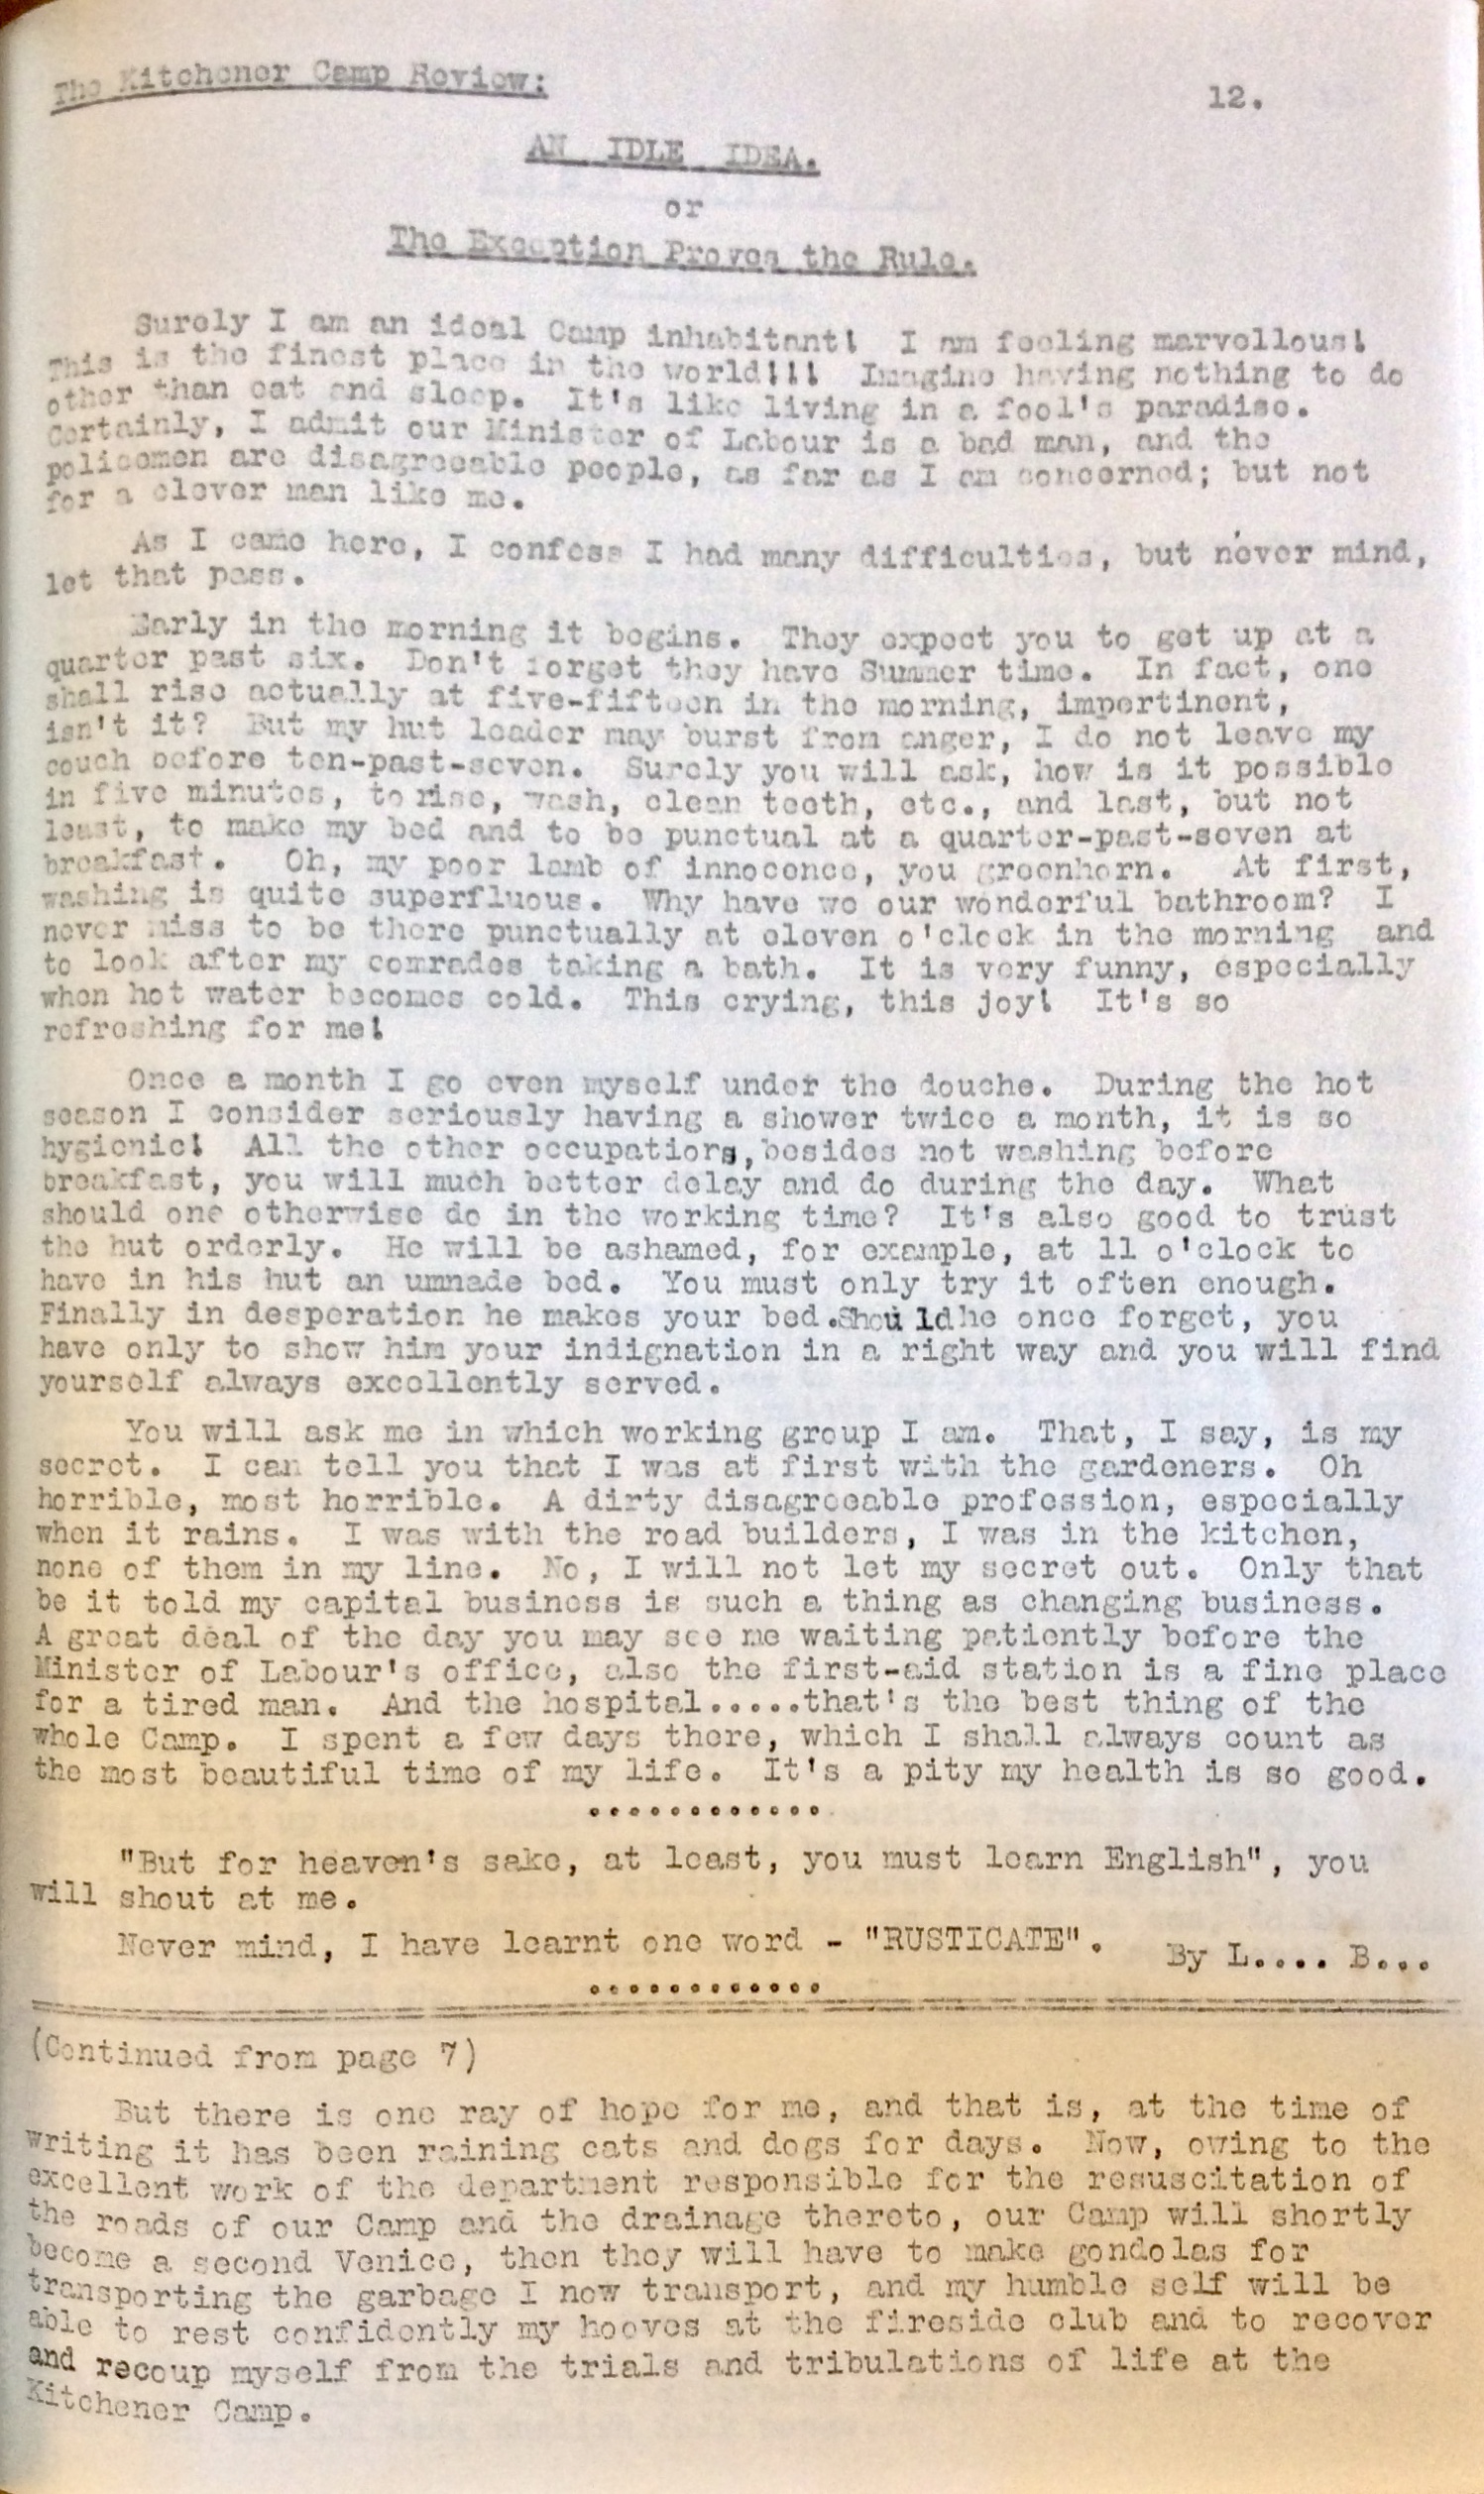 Kitchener Camp Review, June 1939, page 12